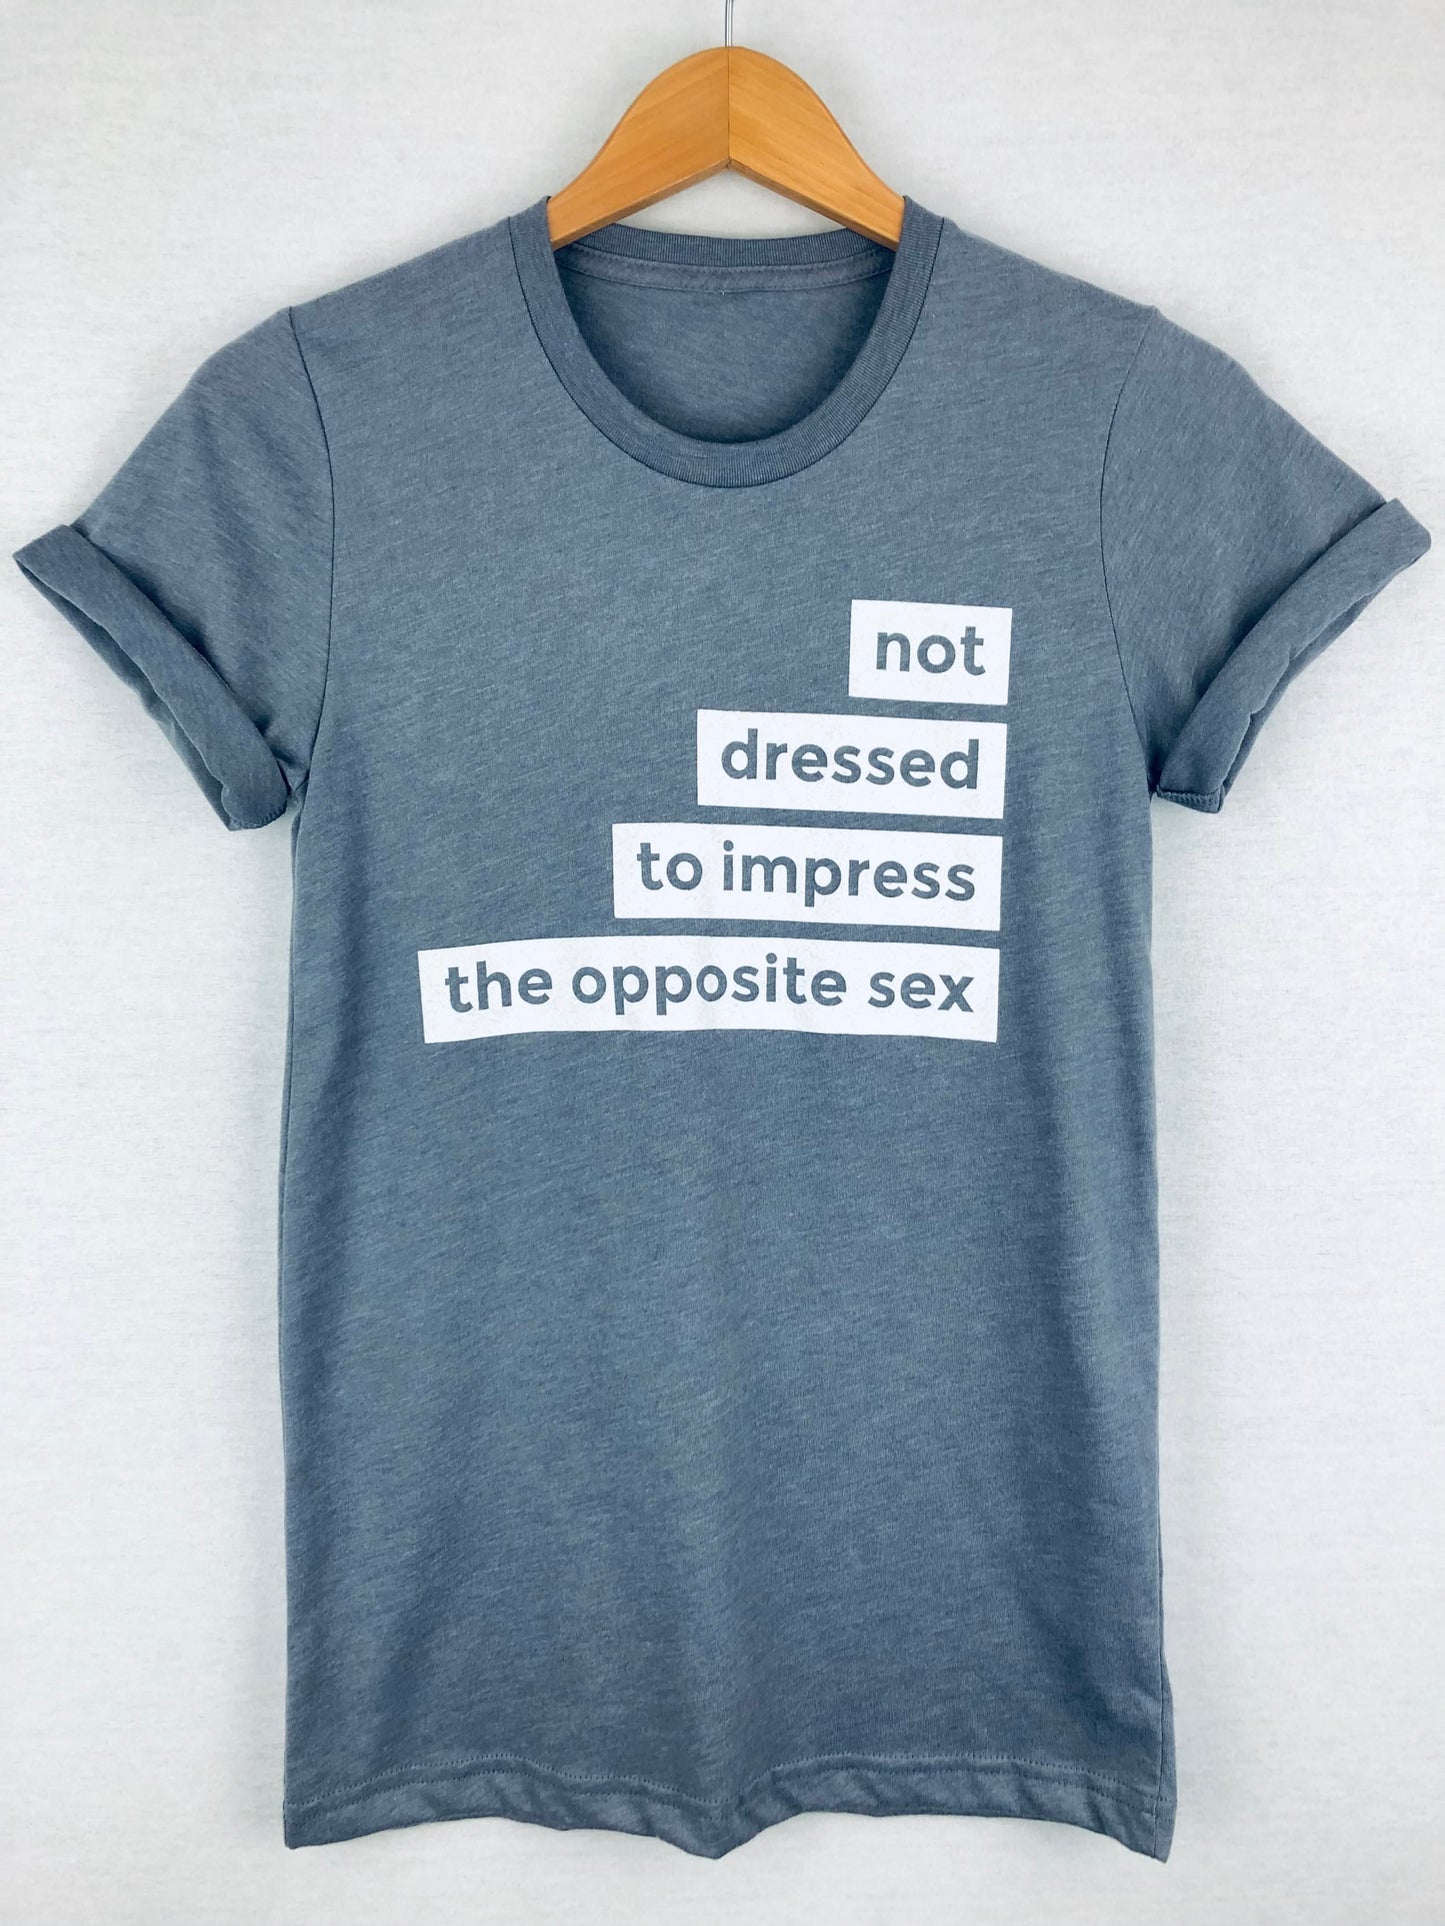 Not dressed to impress the opposite sex crewneck by Androgynous Fox